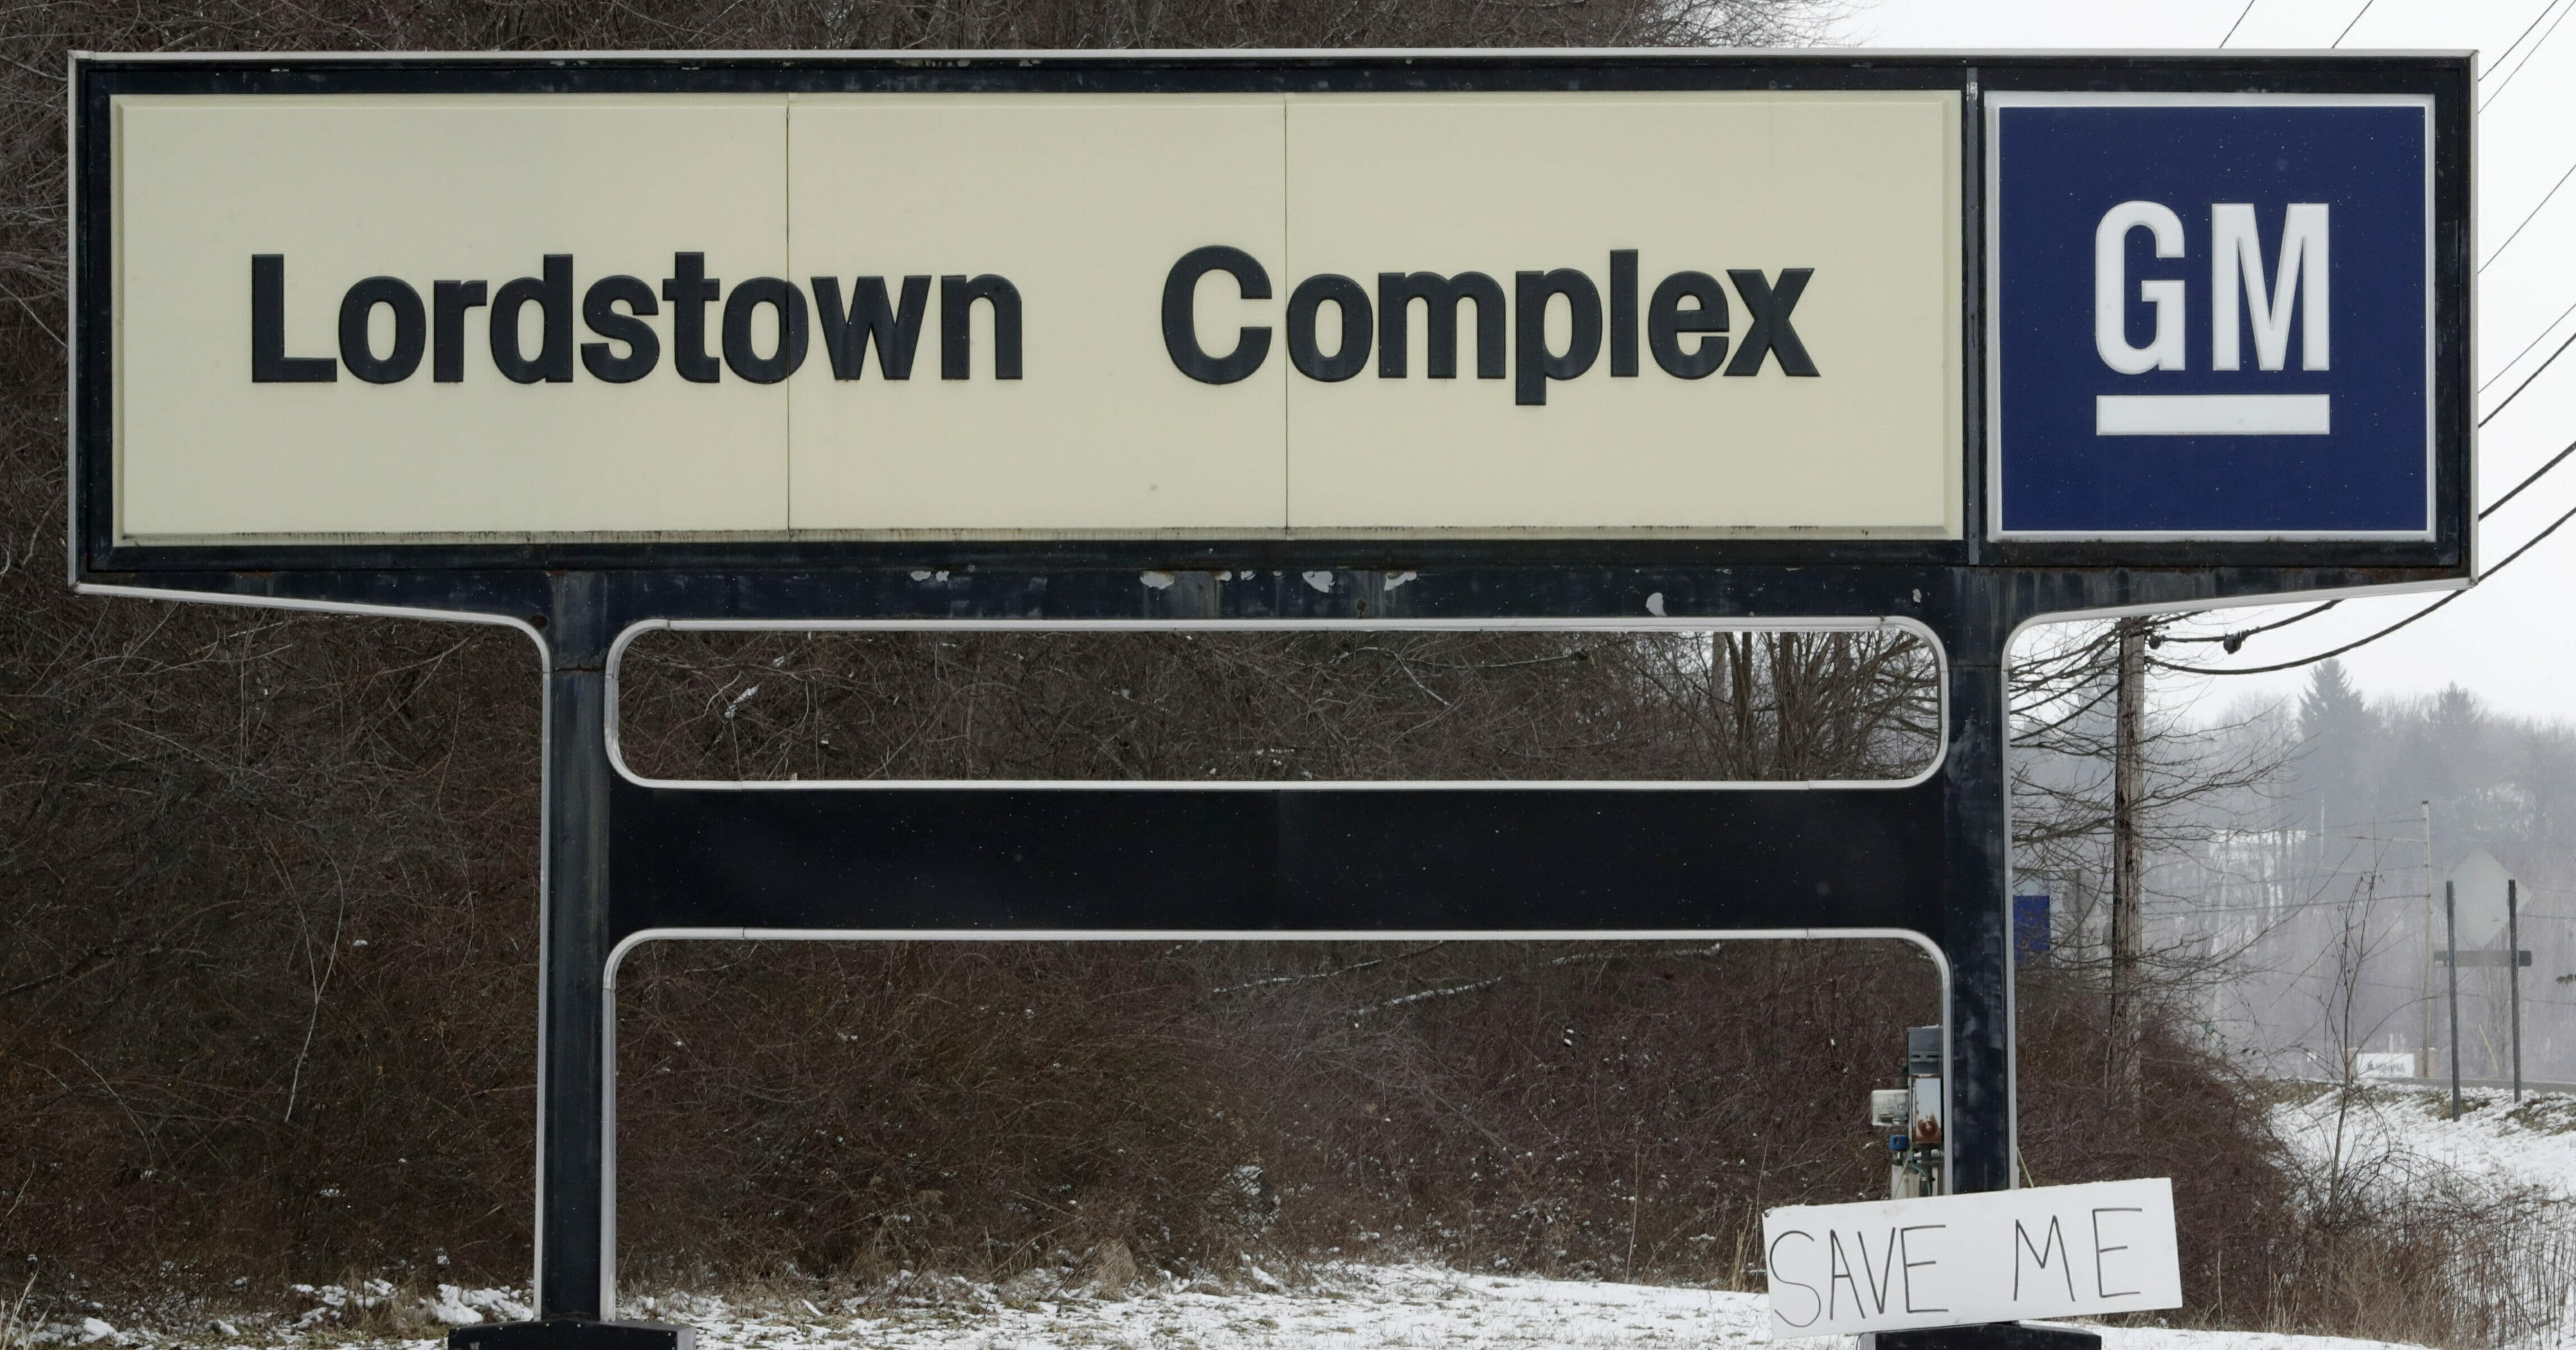 The General Motors Lordstown Complex sign in Ohio. GM plans to sell its shuttered factory in Lordstown to a company that builds electric trucks. President Donald Trump announced the deal Wednesday morning, May 8, 2019, on Twitter.